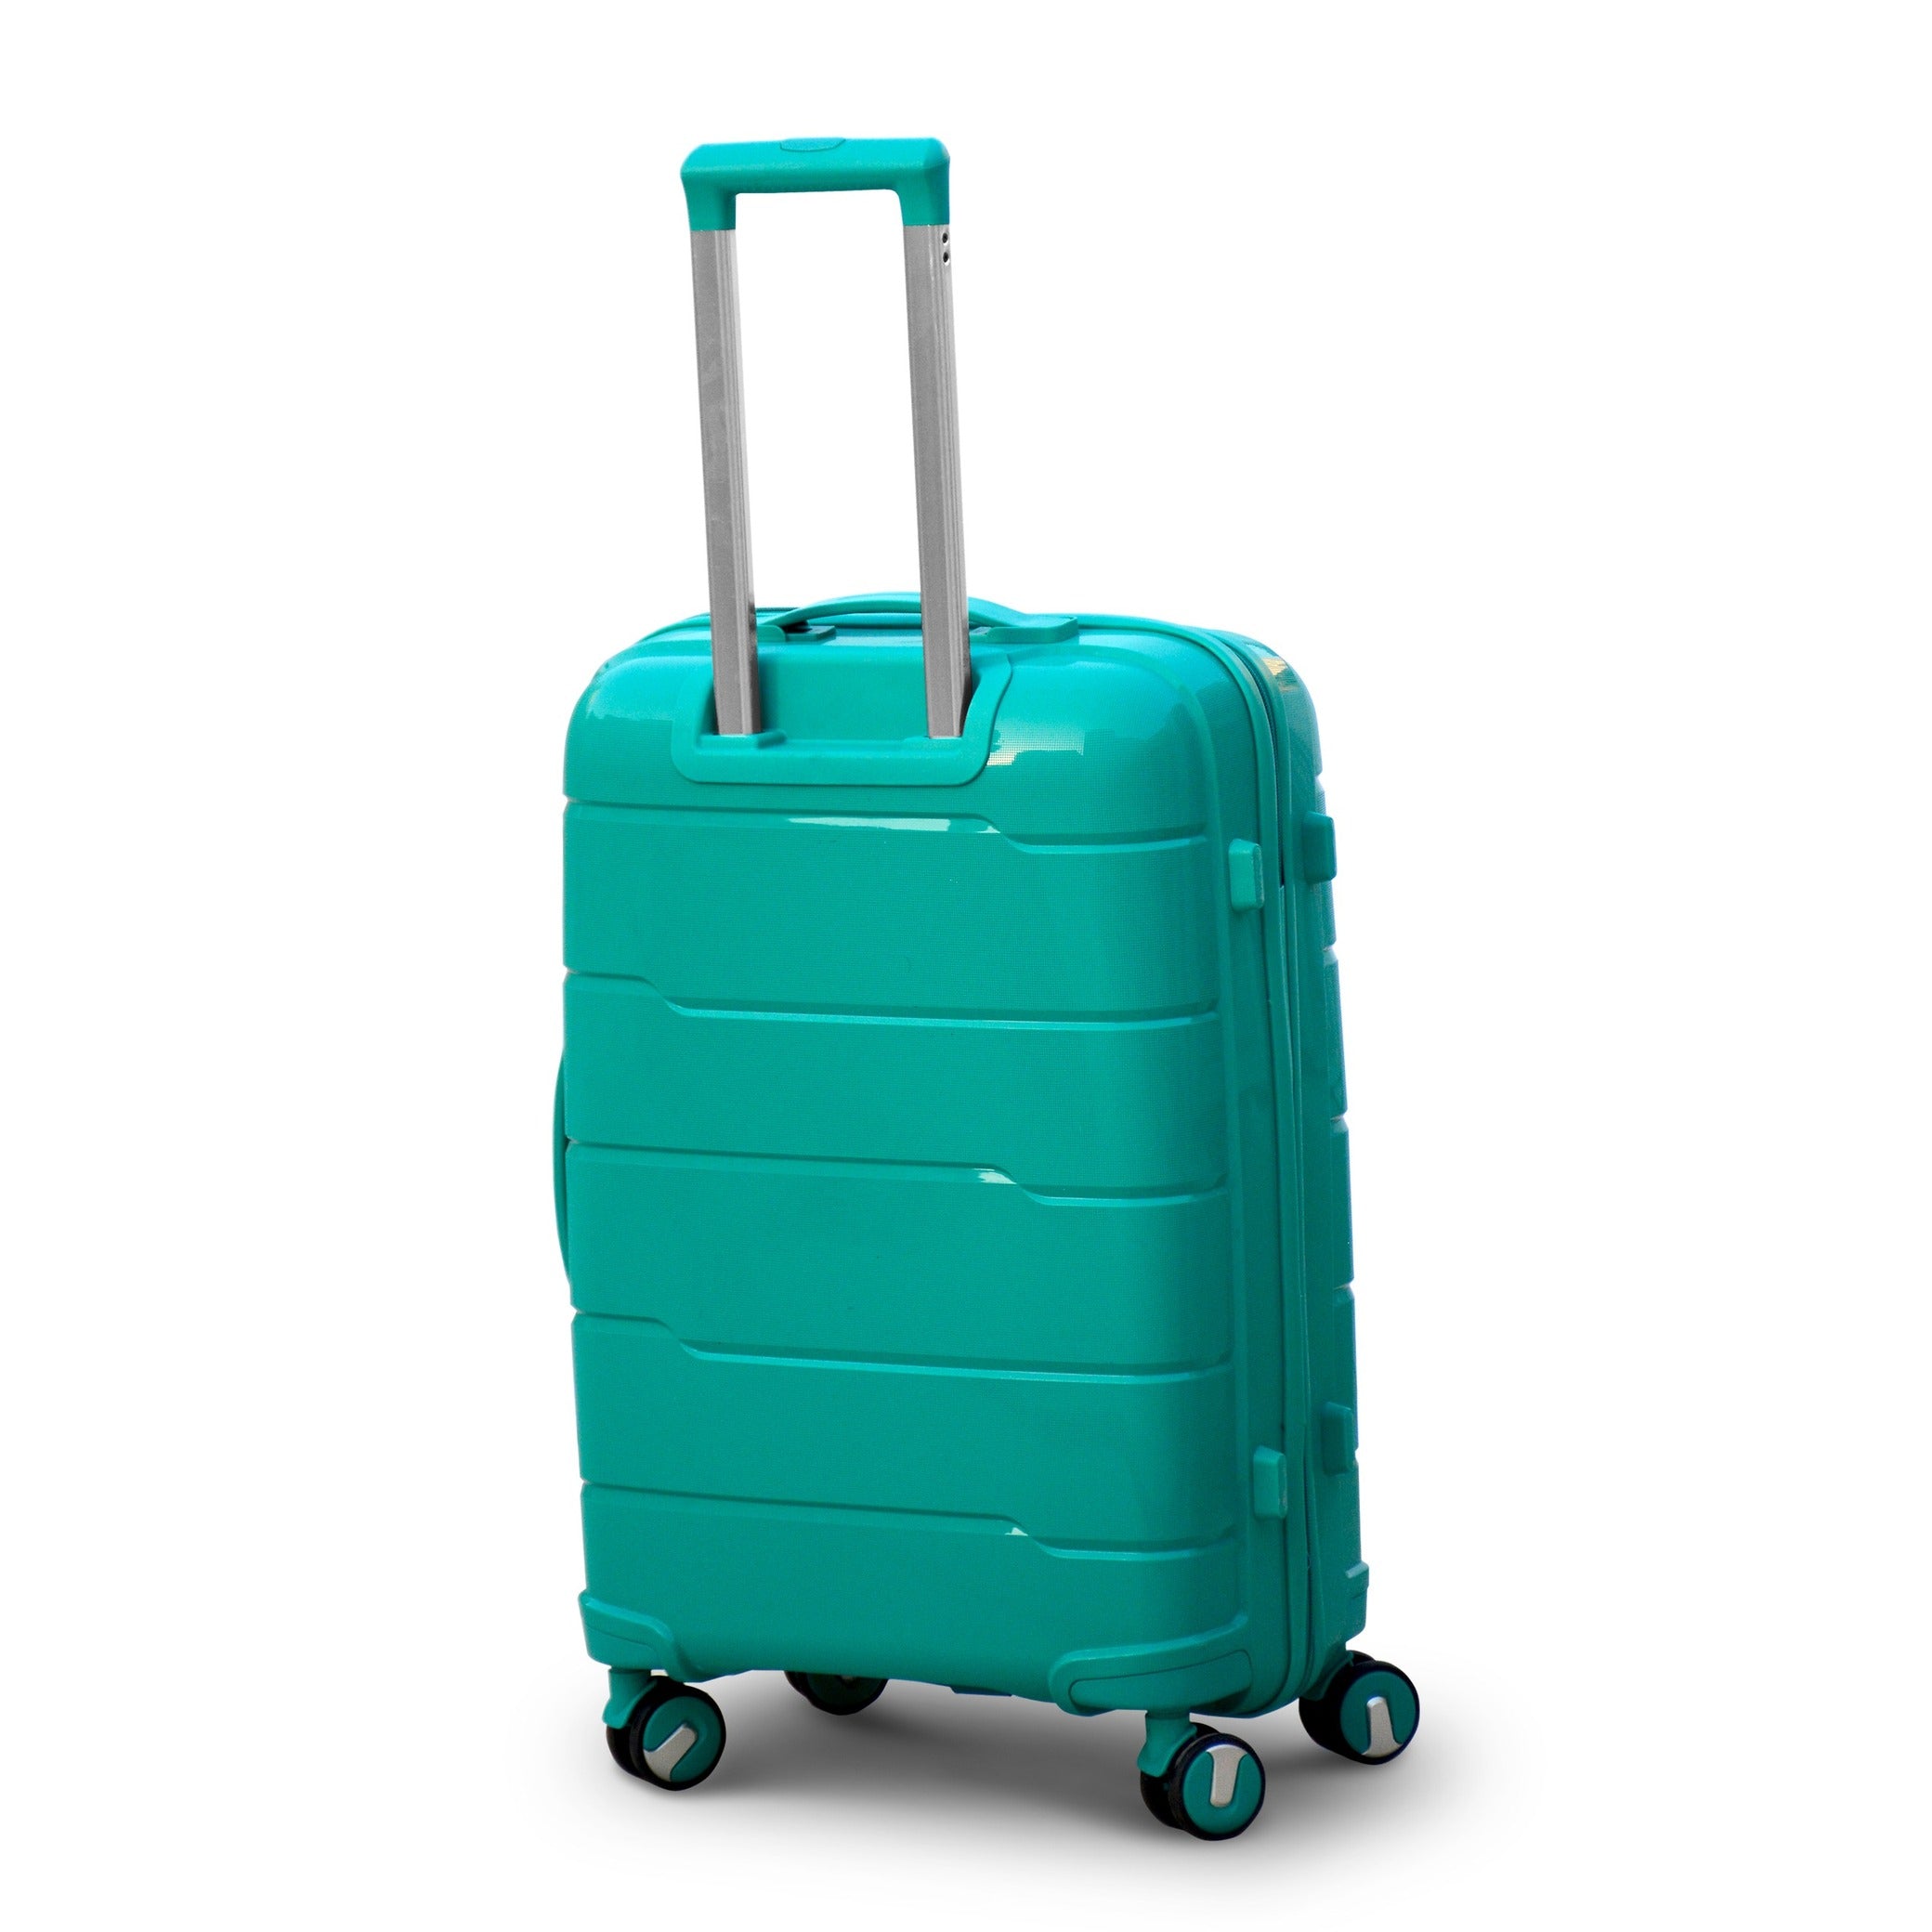 24" Green Colour Non Expandable Ceramic PP Luggage Lightweight Hard Case Trolley Bag with Double Spinner Wheel